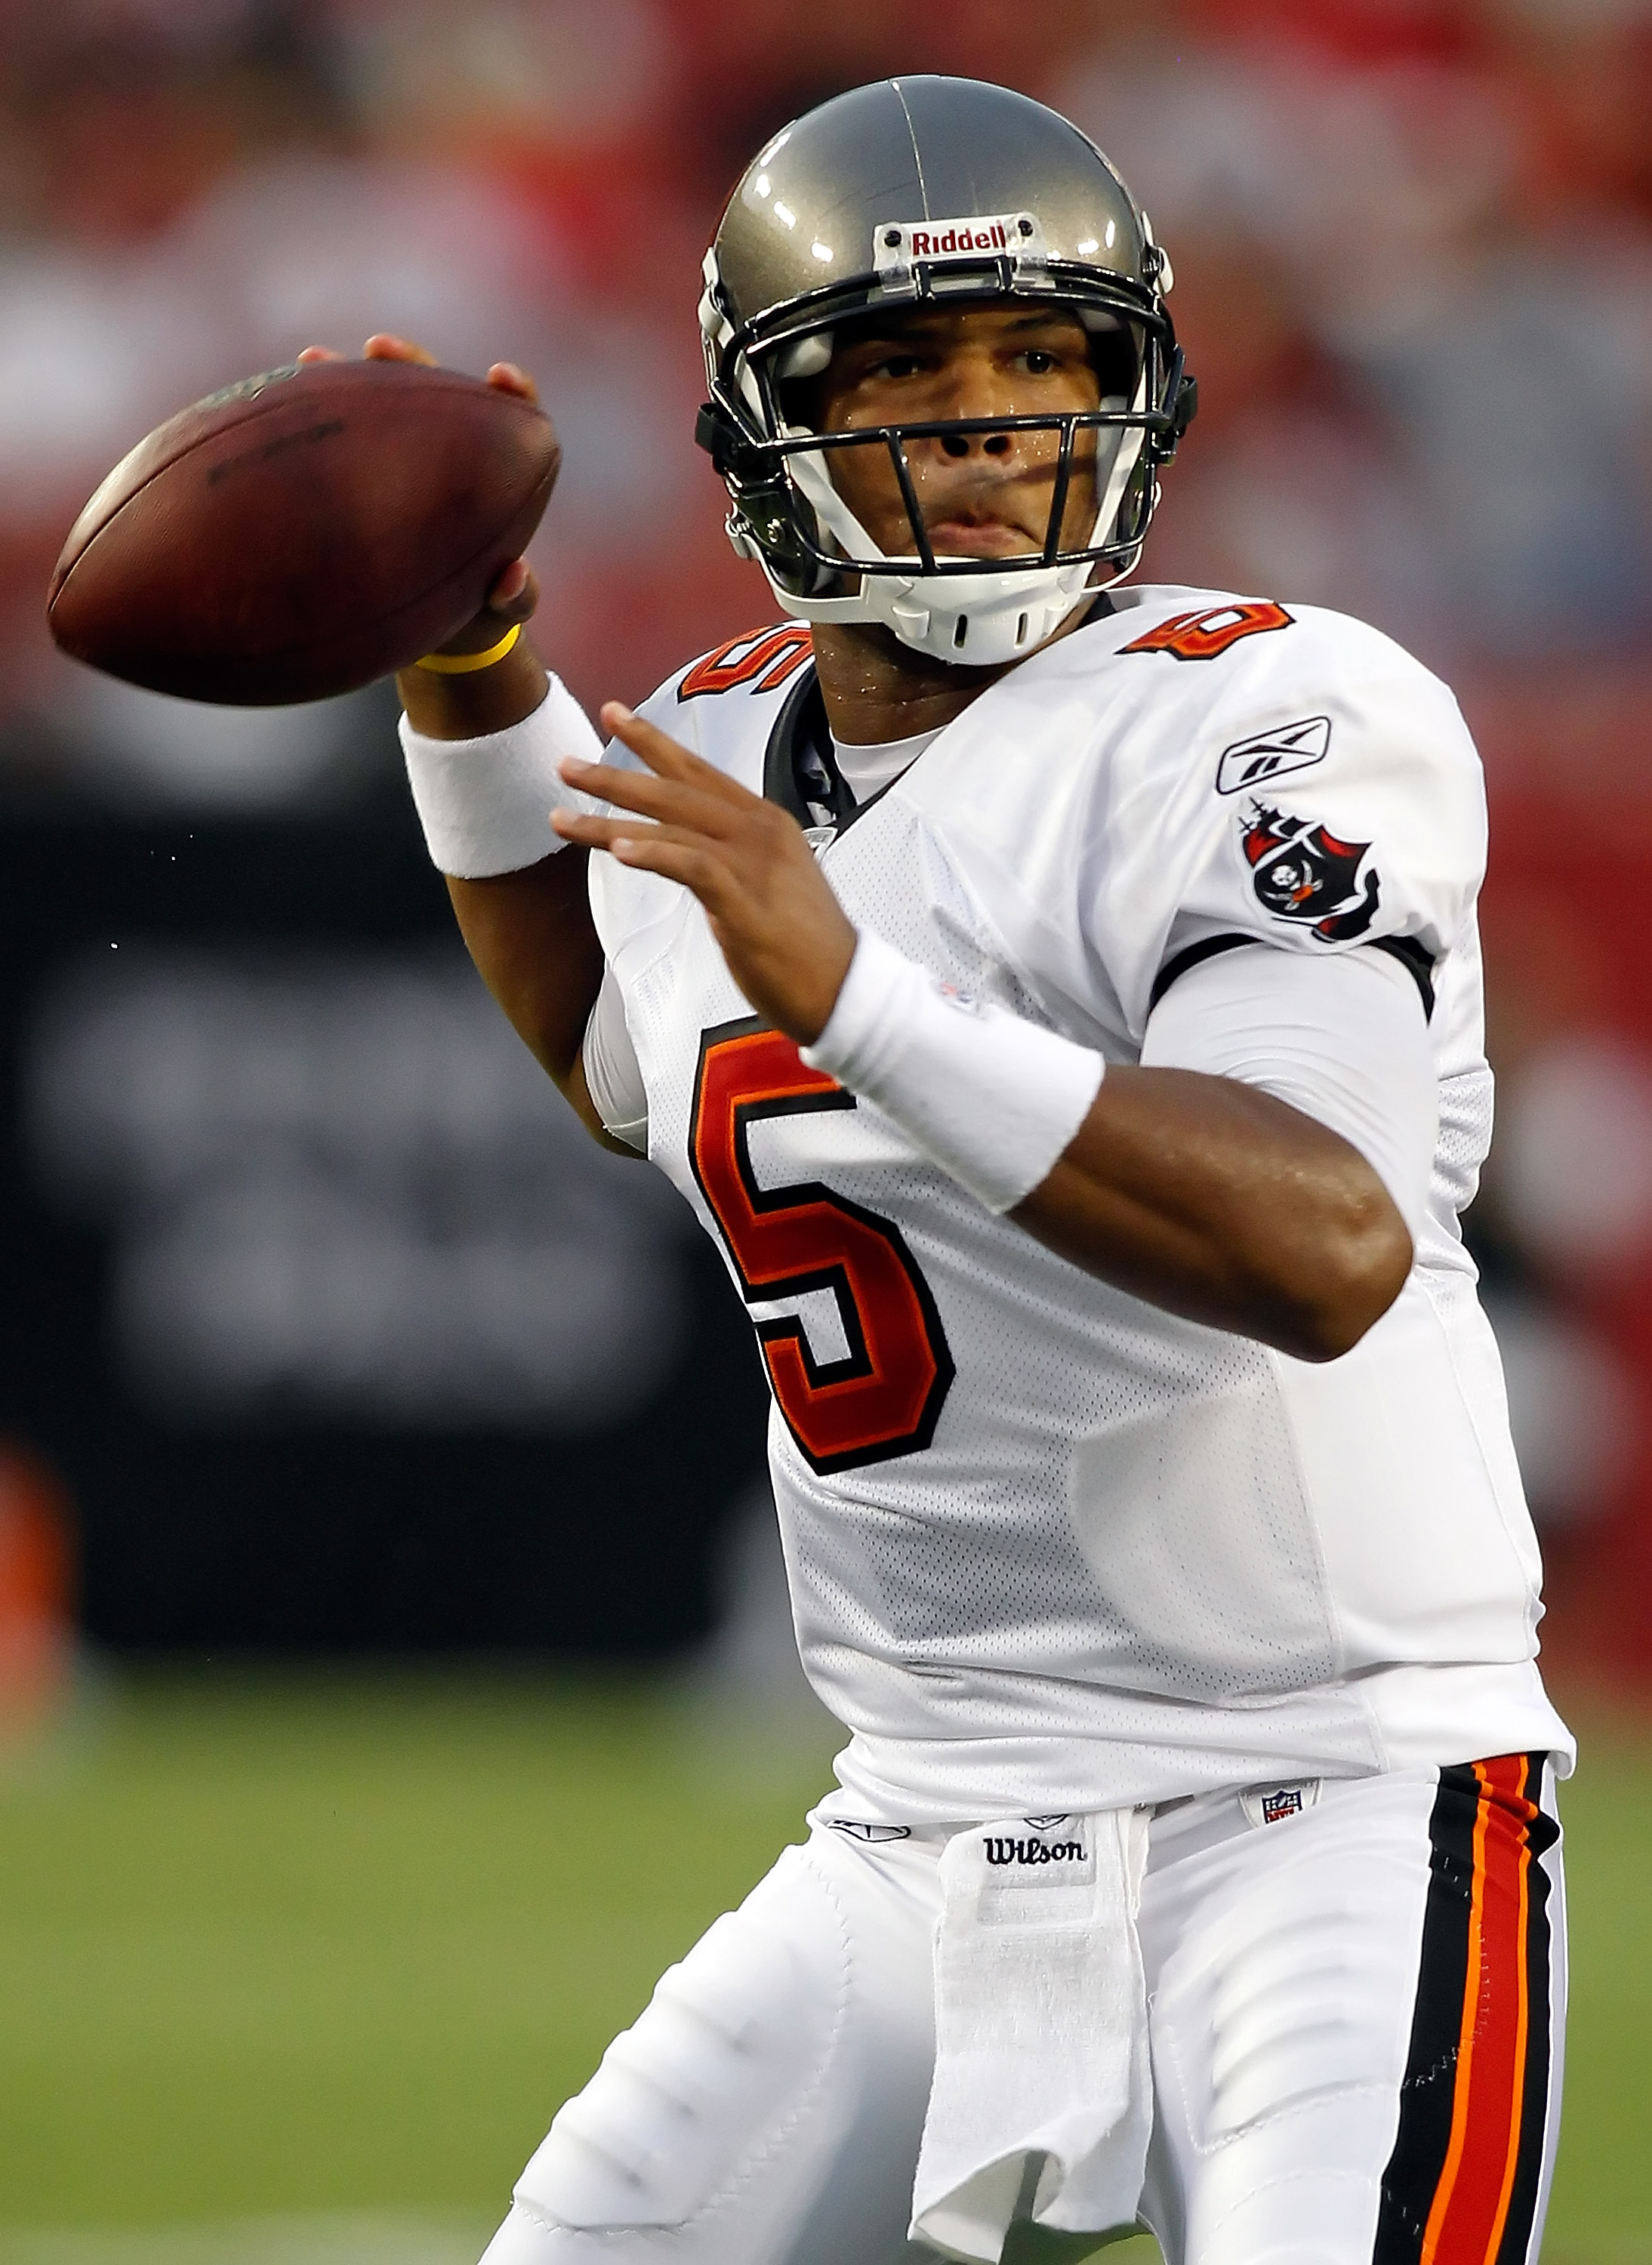 TAMPA, FL - AUGUST 21:  Quarterback Josh Freeman #5 of the Tampa Bay Buccaneers throws a pass against the Kansas City Chiefs during a preseason game at Raymond James Stadium on August 21, 2010 in Tampa, Florida.  (Photo by J. Meric/Getty Images)